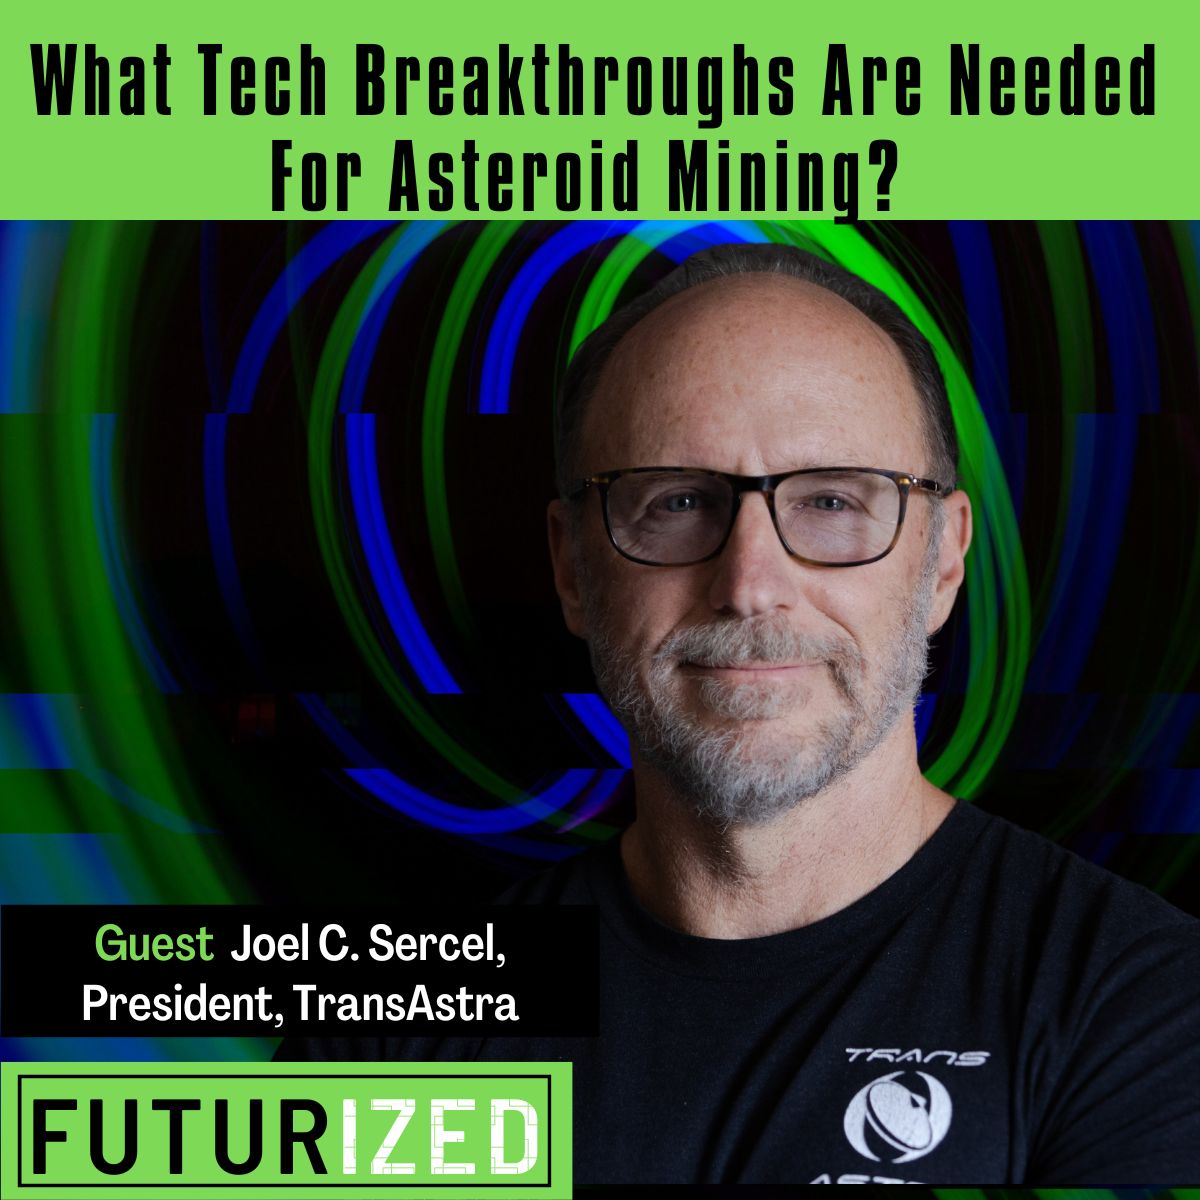 What Tech Breakthroughs Are Needed For Asteroid Mining?